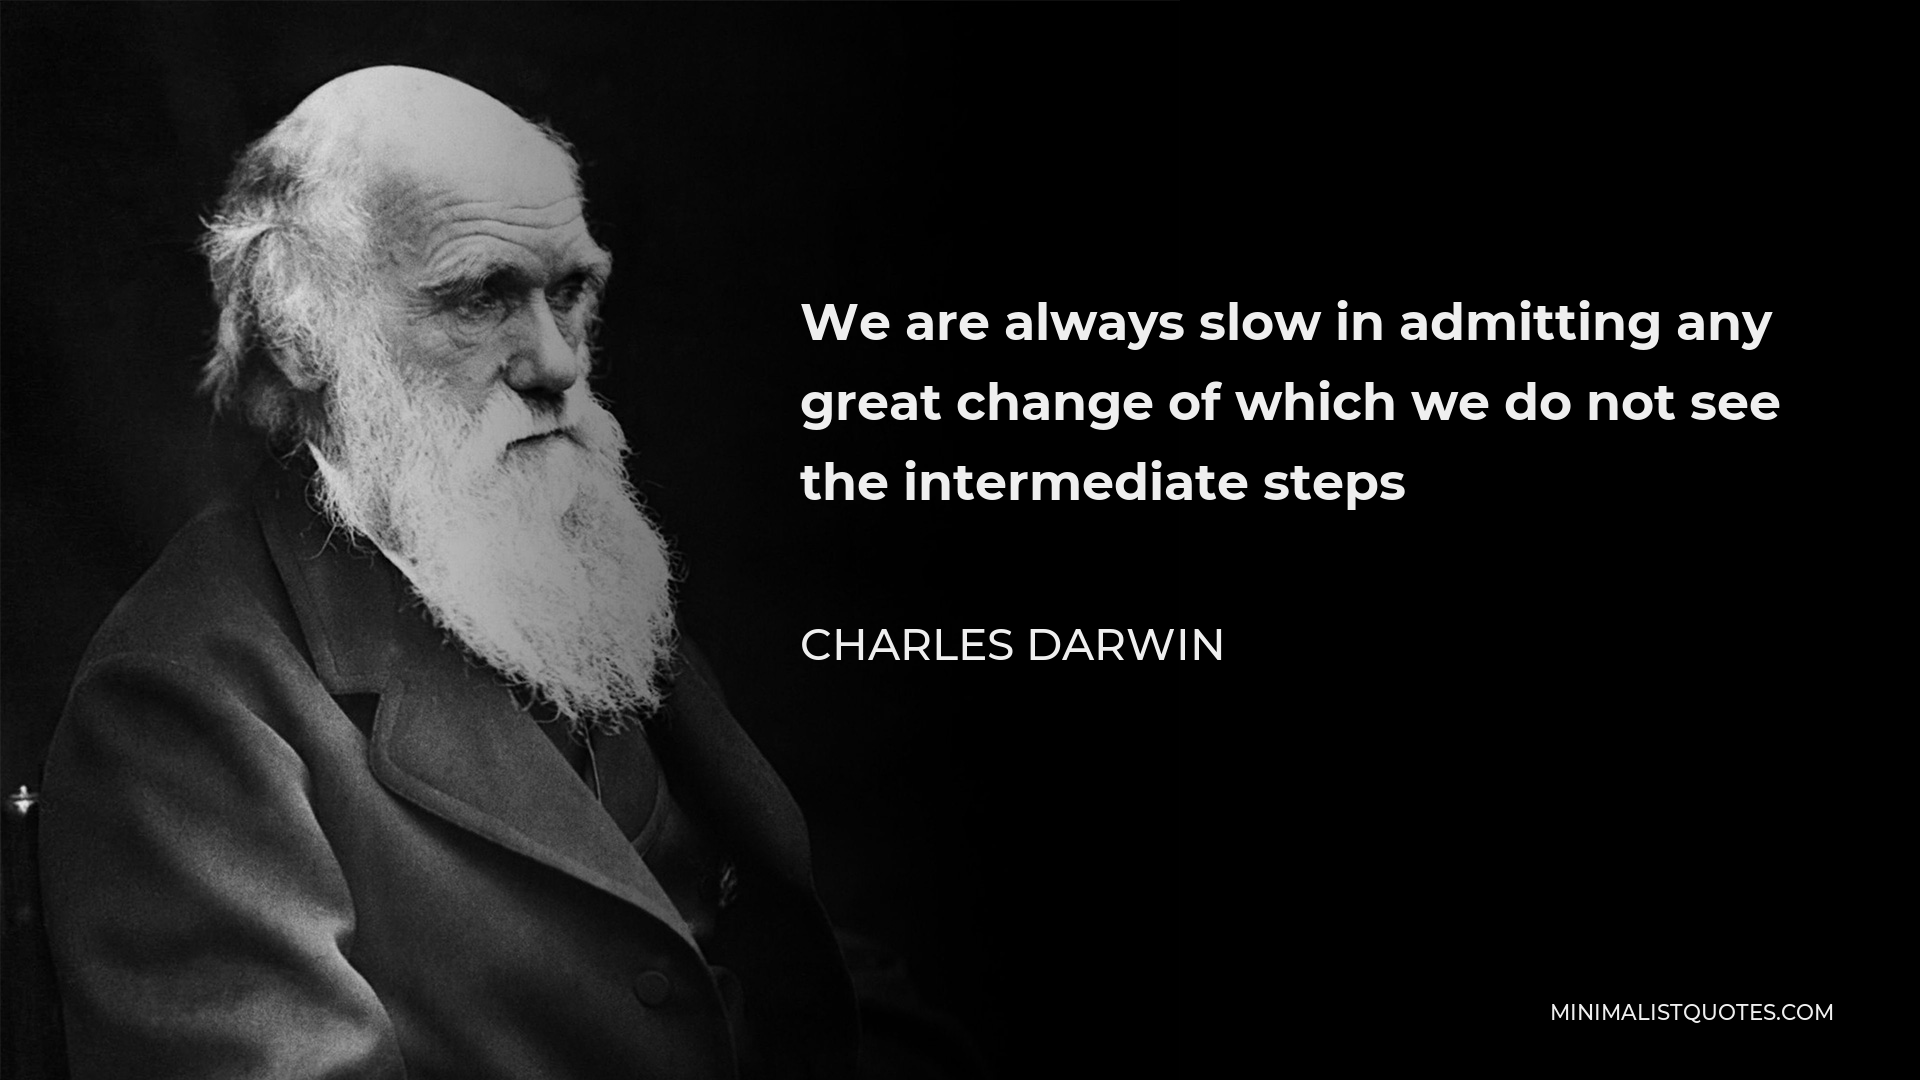 Charles Darwin Quote - We are always slow in admitting any great change of which we do not see the intermediate steps